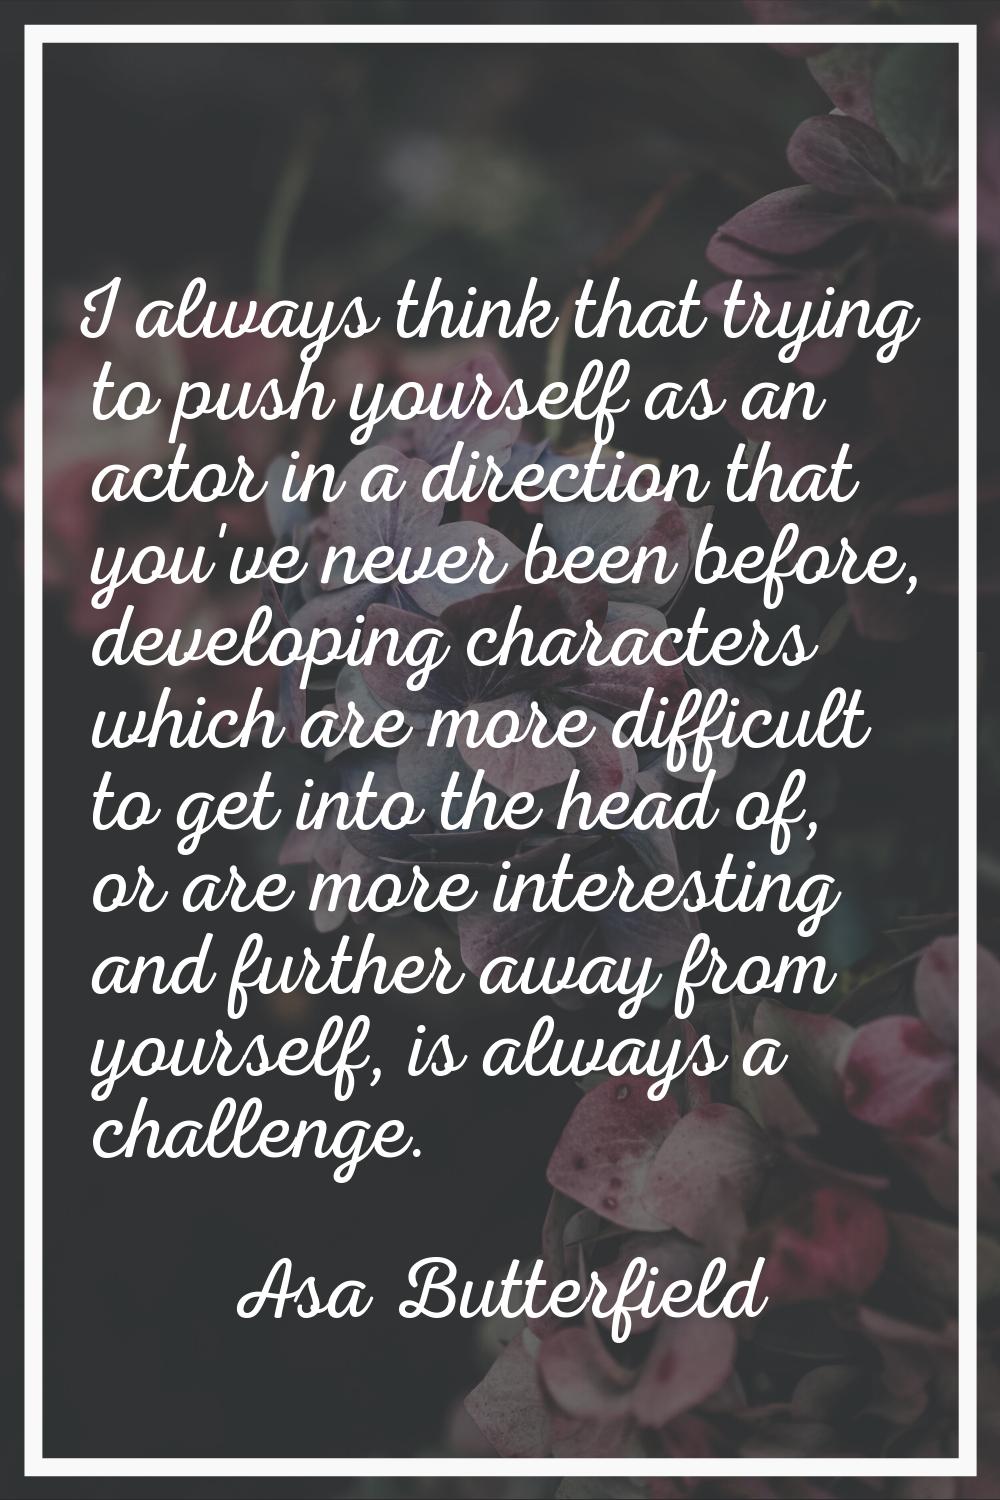 I always think that trying to push yourself as an actor in a direction that you've never been befor